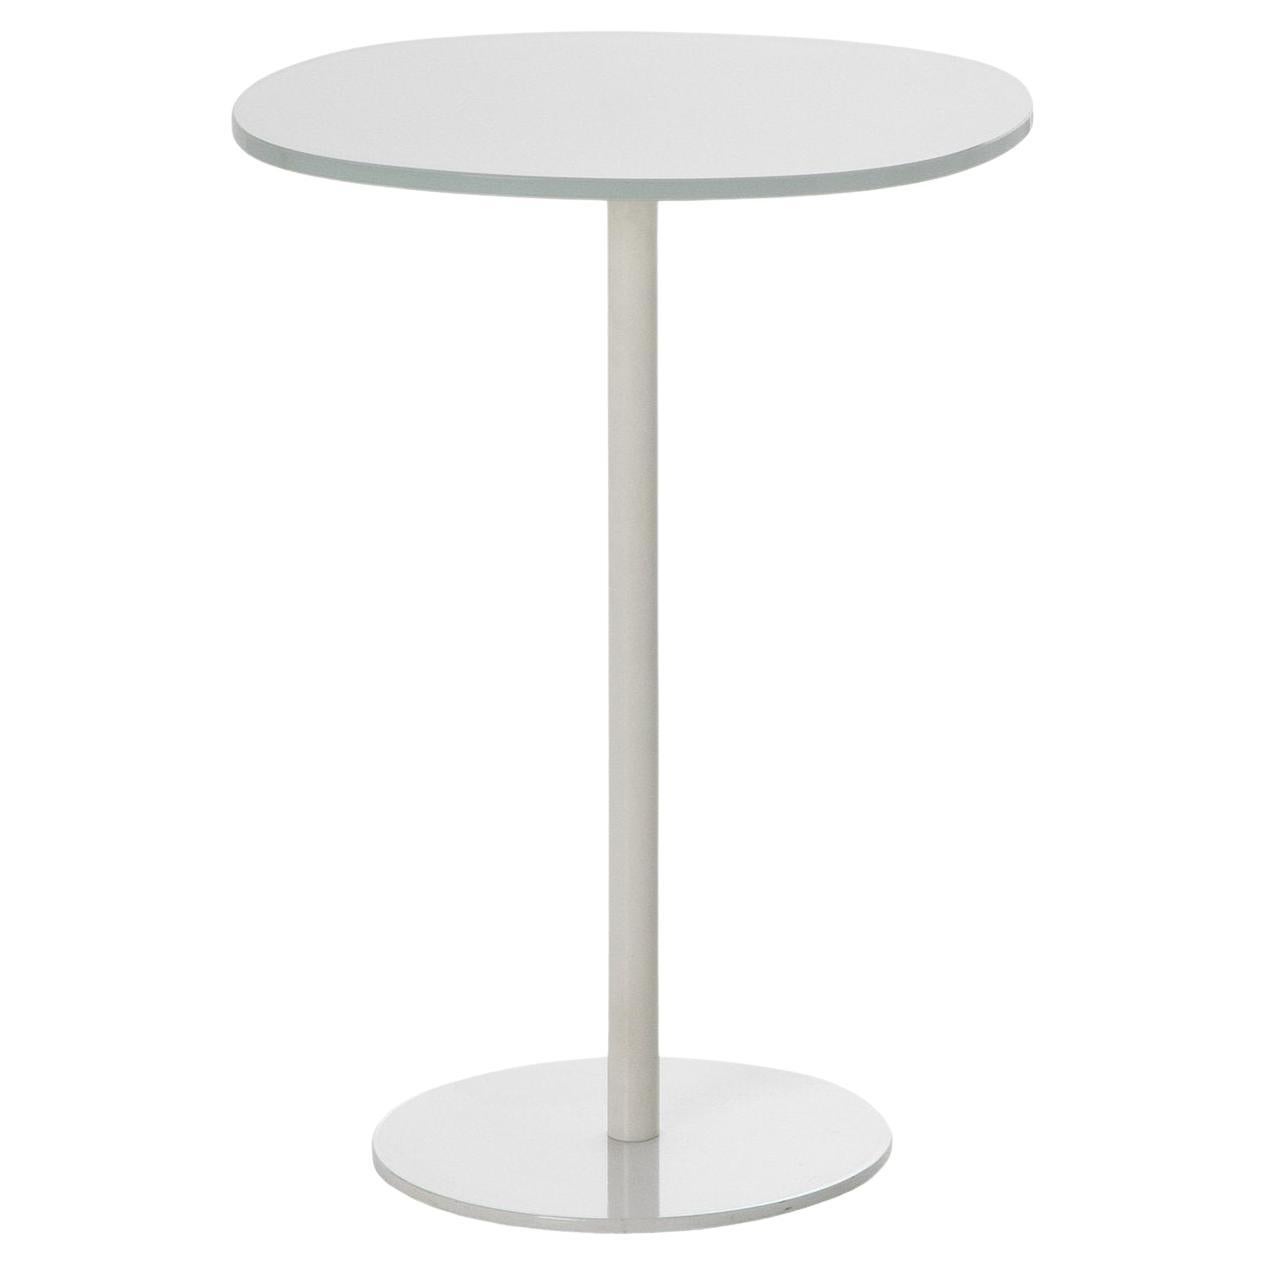 Solenoide White Tall Side Table by Piero Lissoni